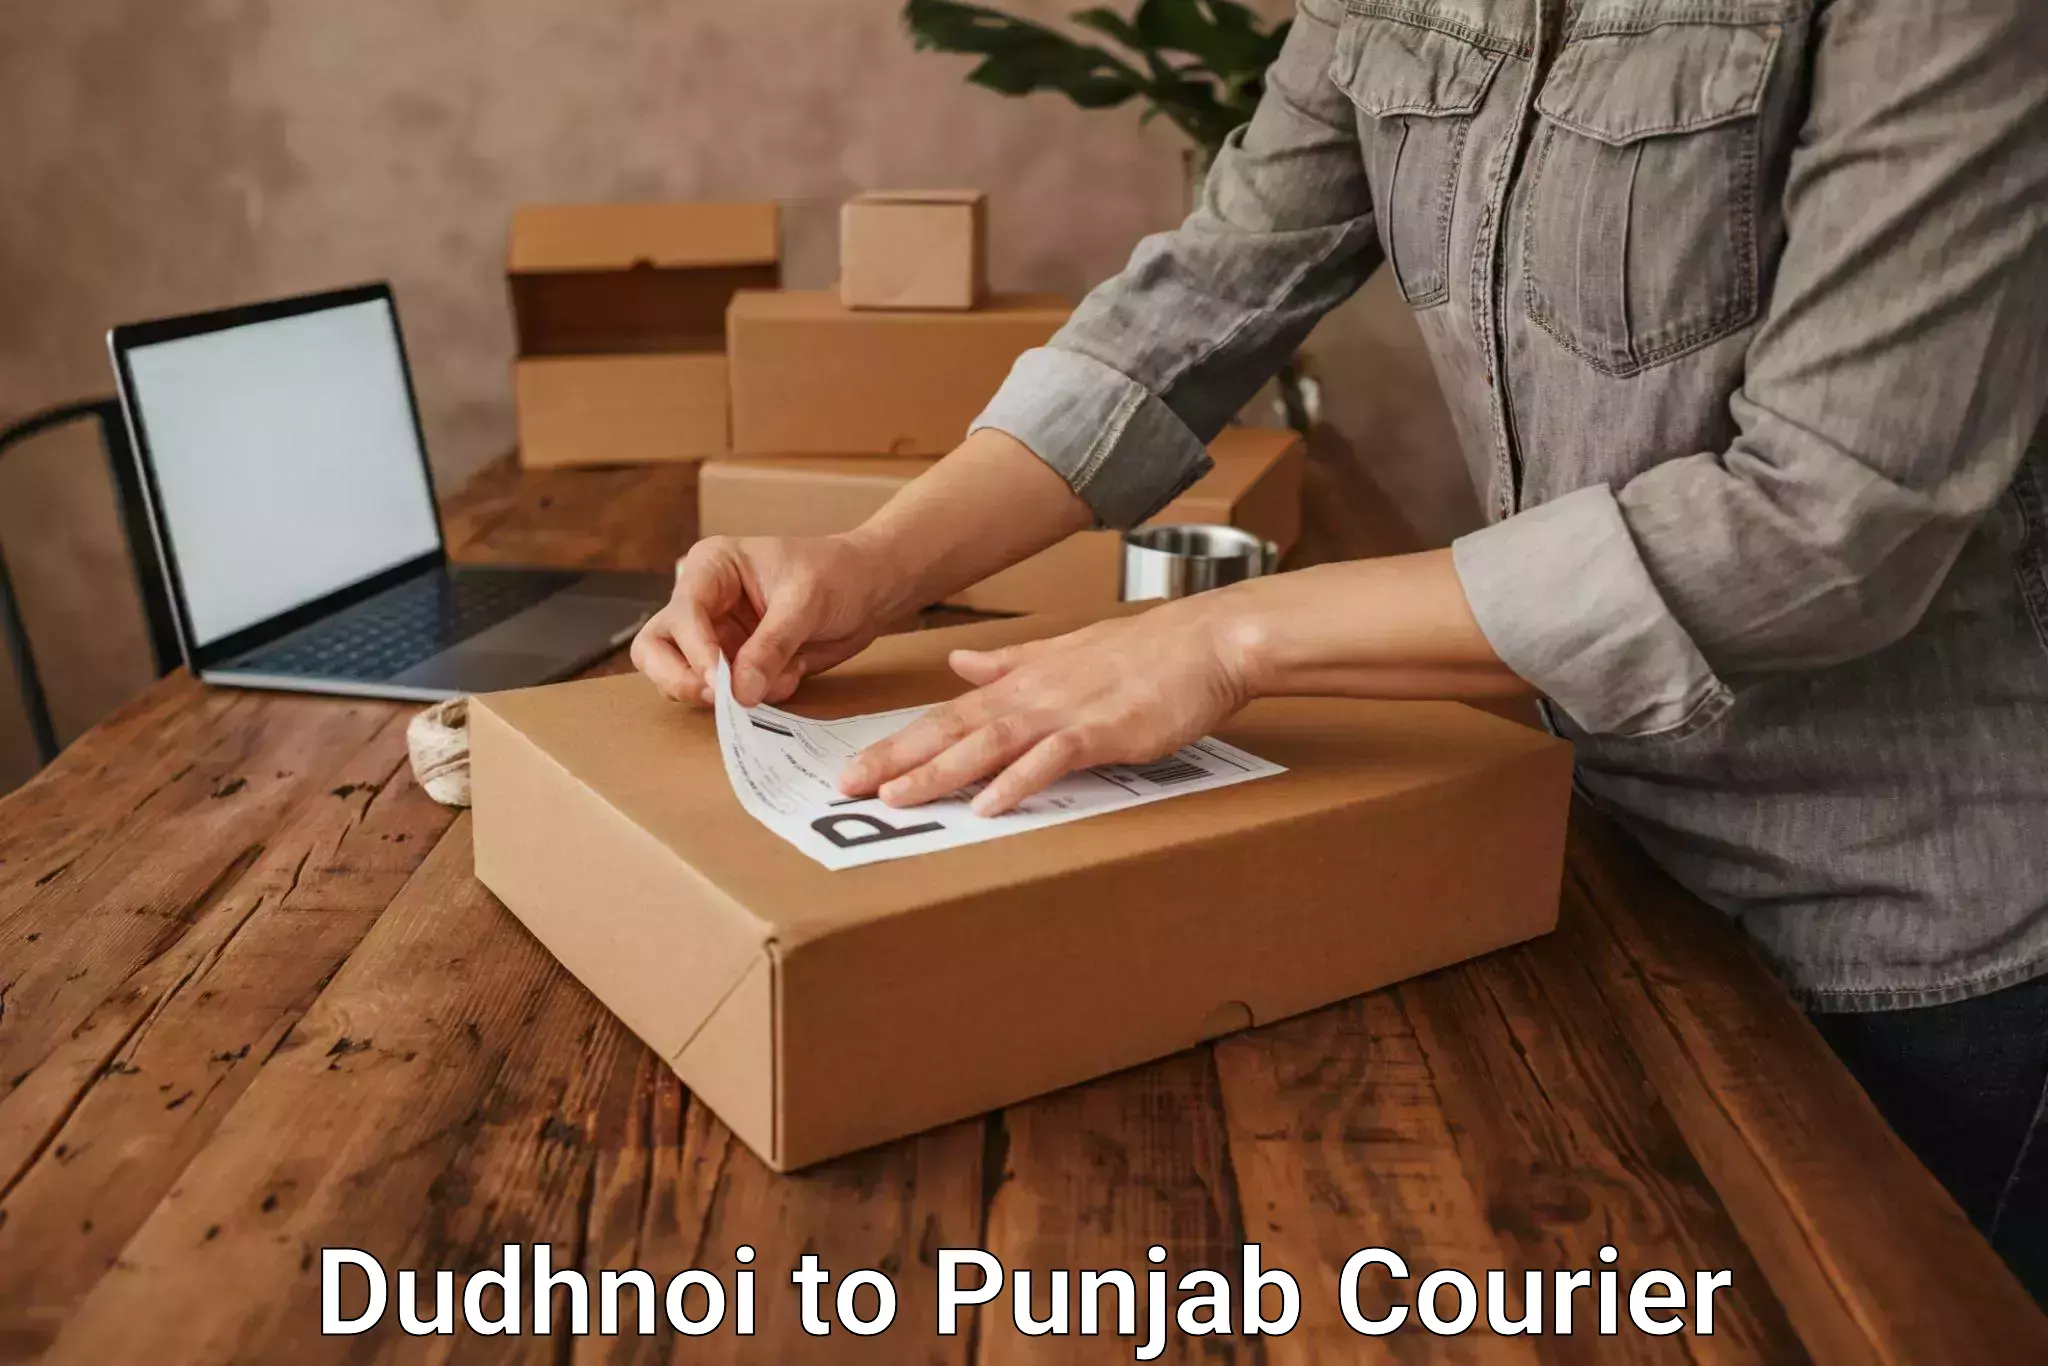 Sustainable shipping practices in Dudhnoi to Fatehgarh Sahib